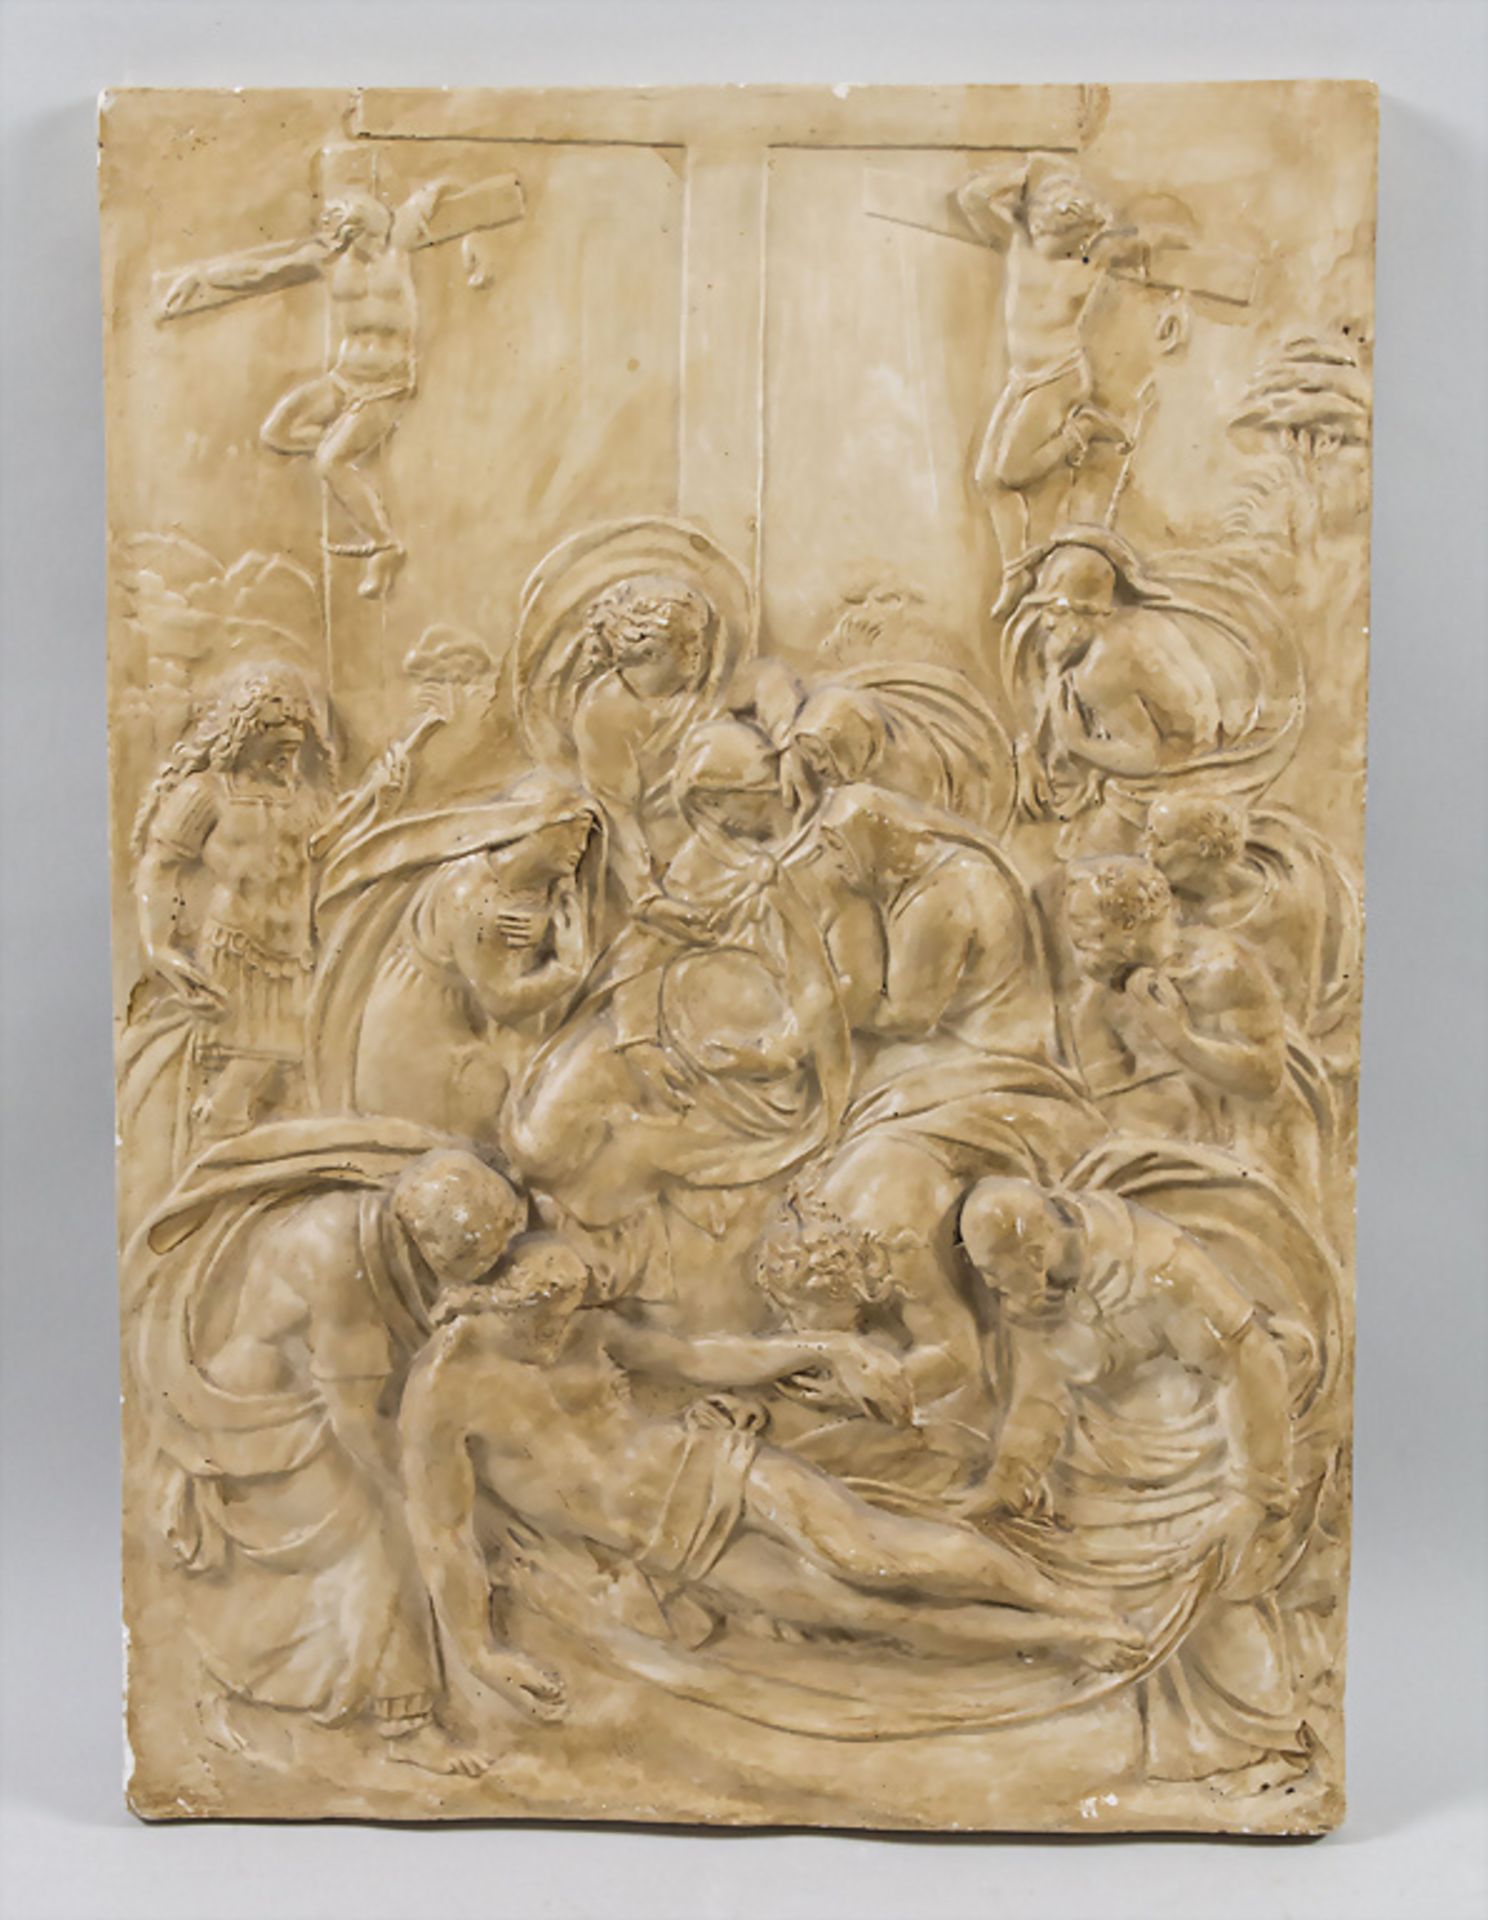 Wandrelief 'Kreuzabnahme' / A wall relief 'Removal of the cross'